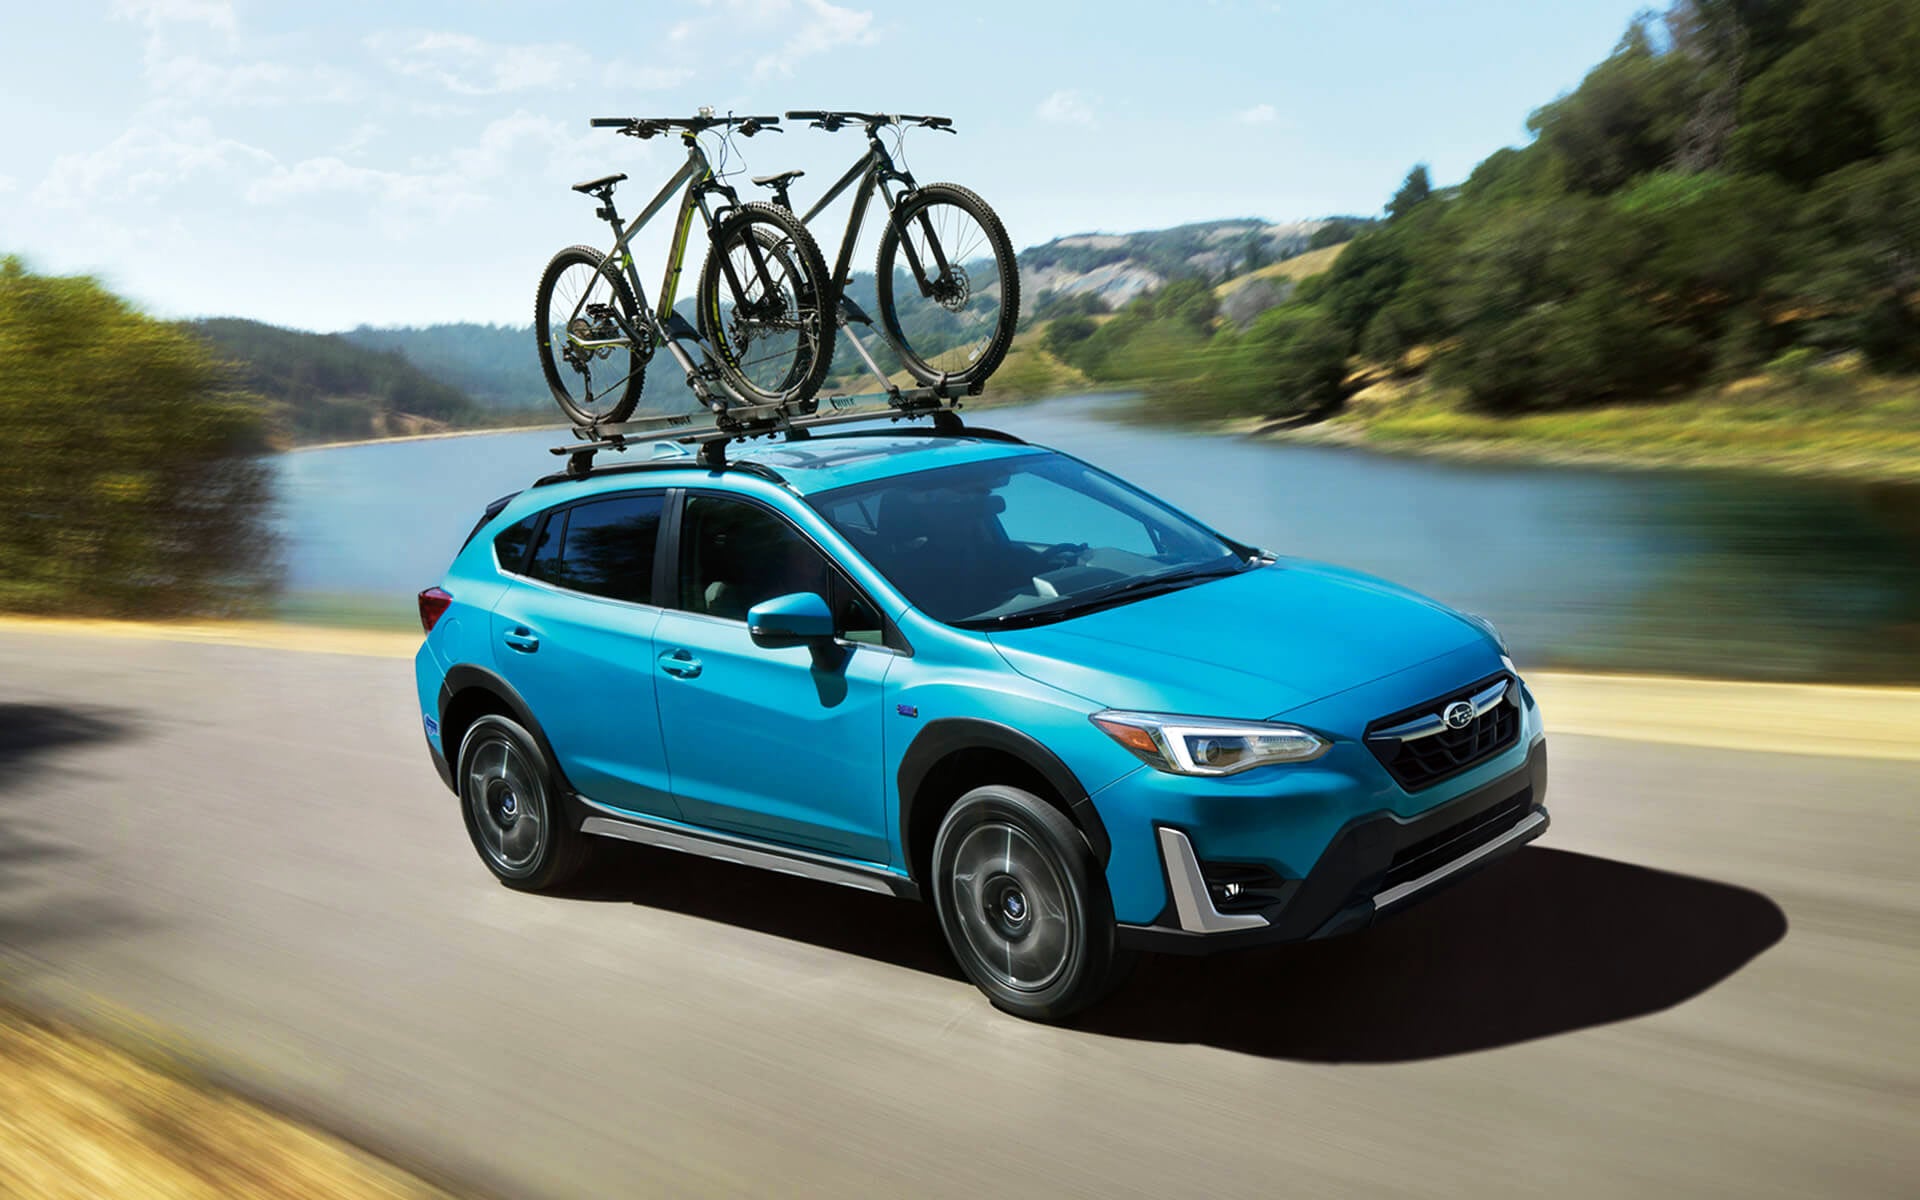 A blue Crosstrek Hybrid with two bicycles on its roof rack driving beside a river | Dean Team Subaru in Ballwin MO